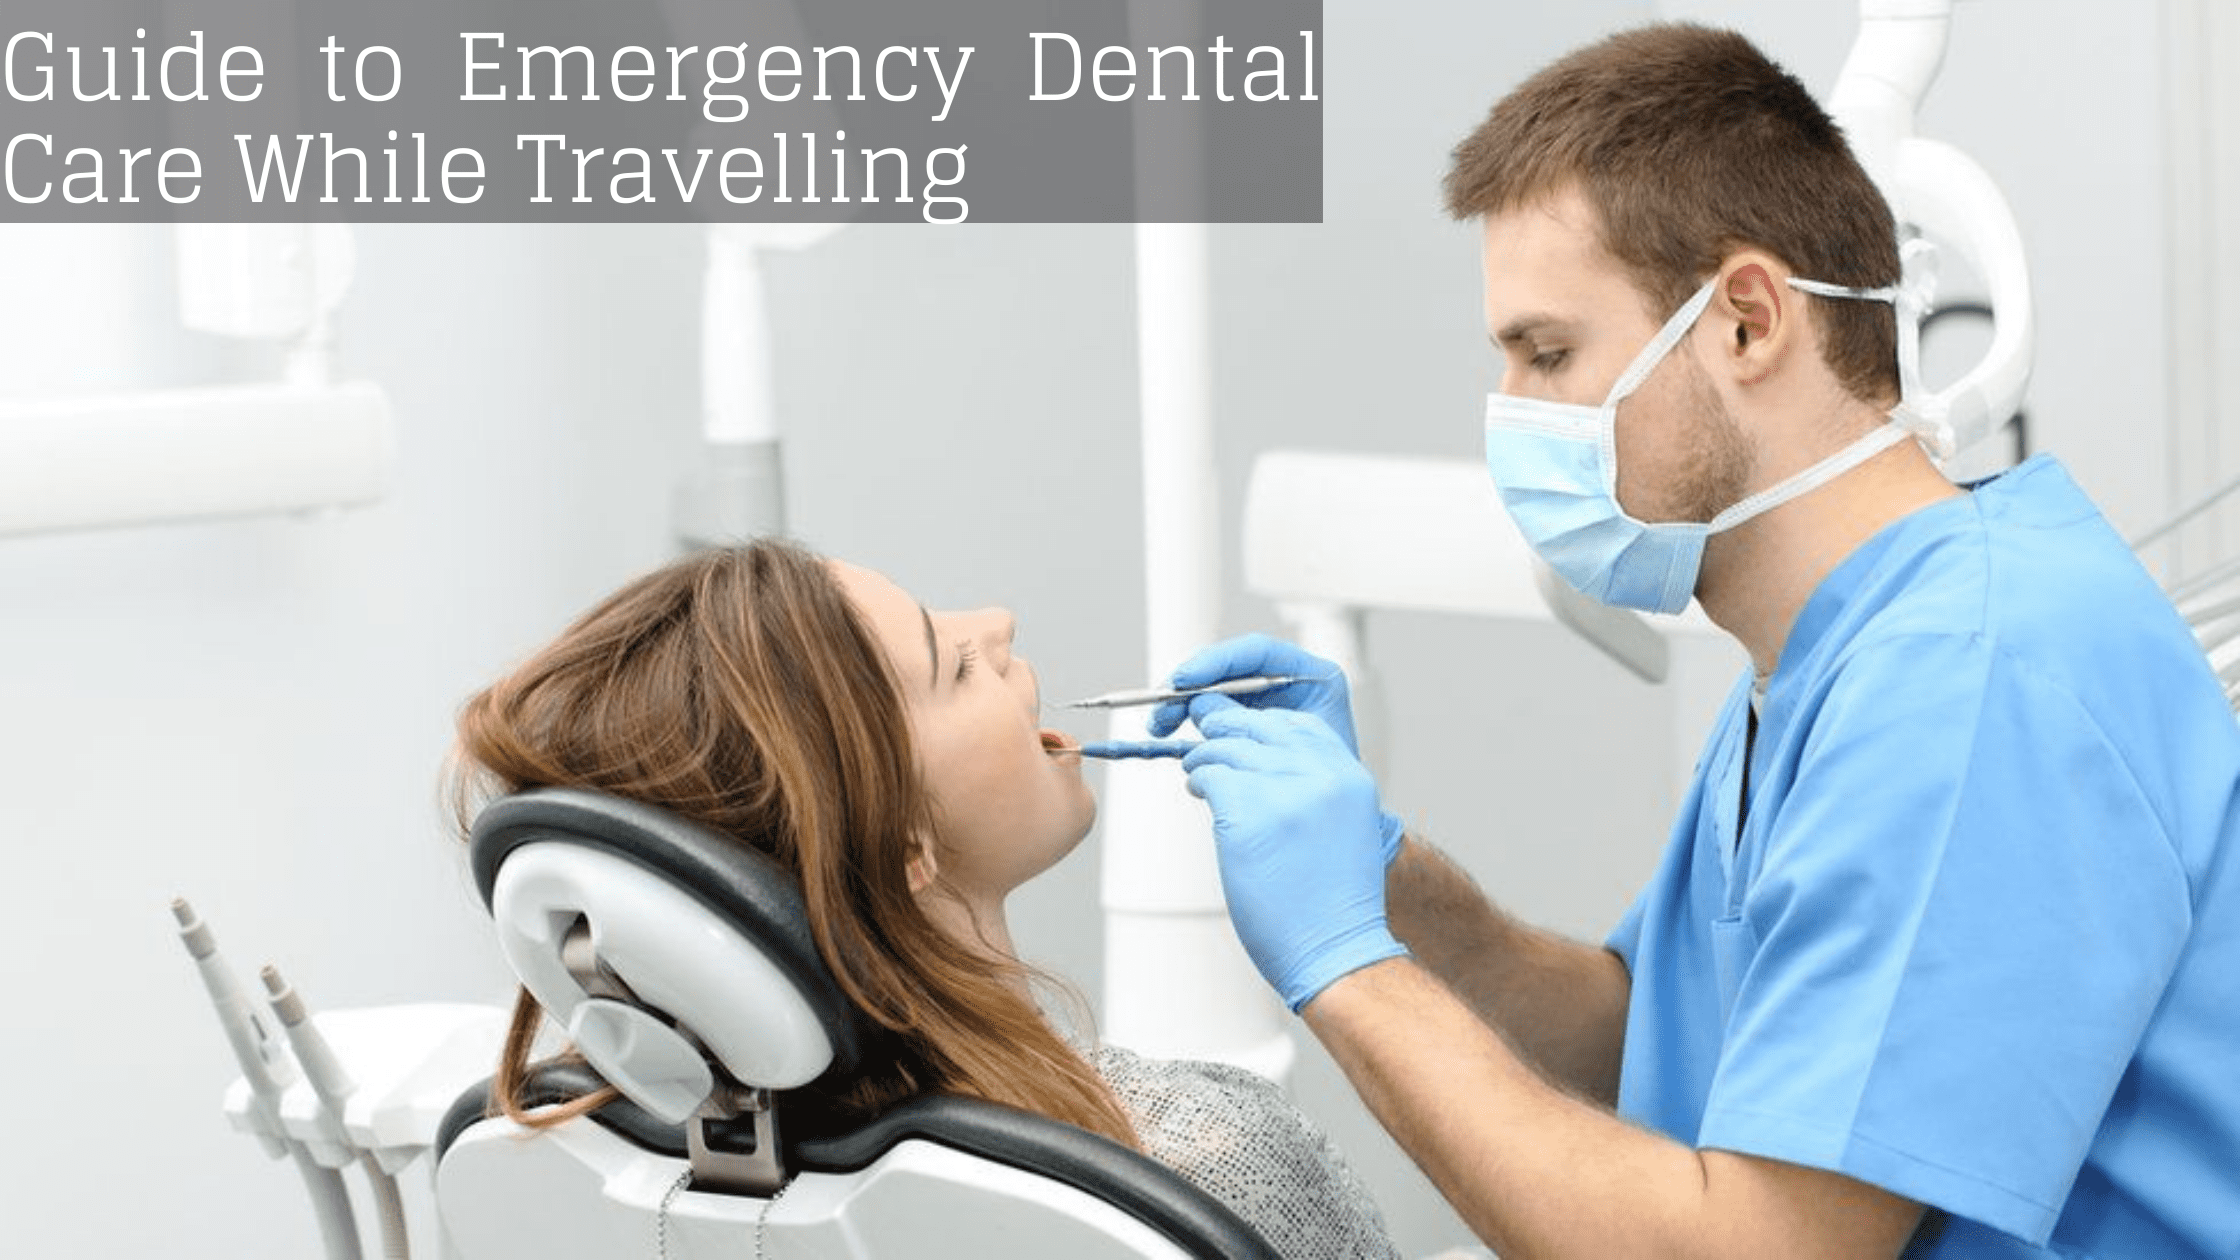 Guide to Emergency Dental Care While Travelling